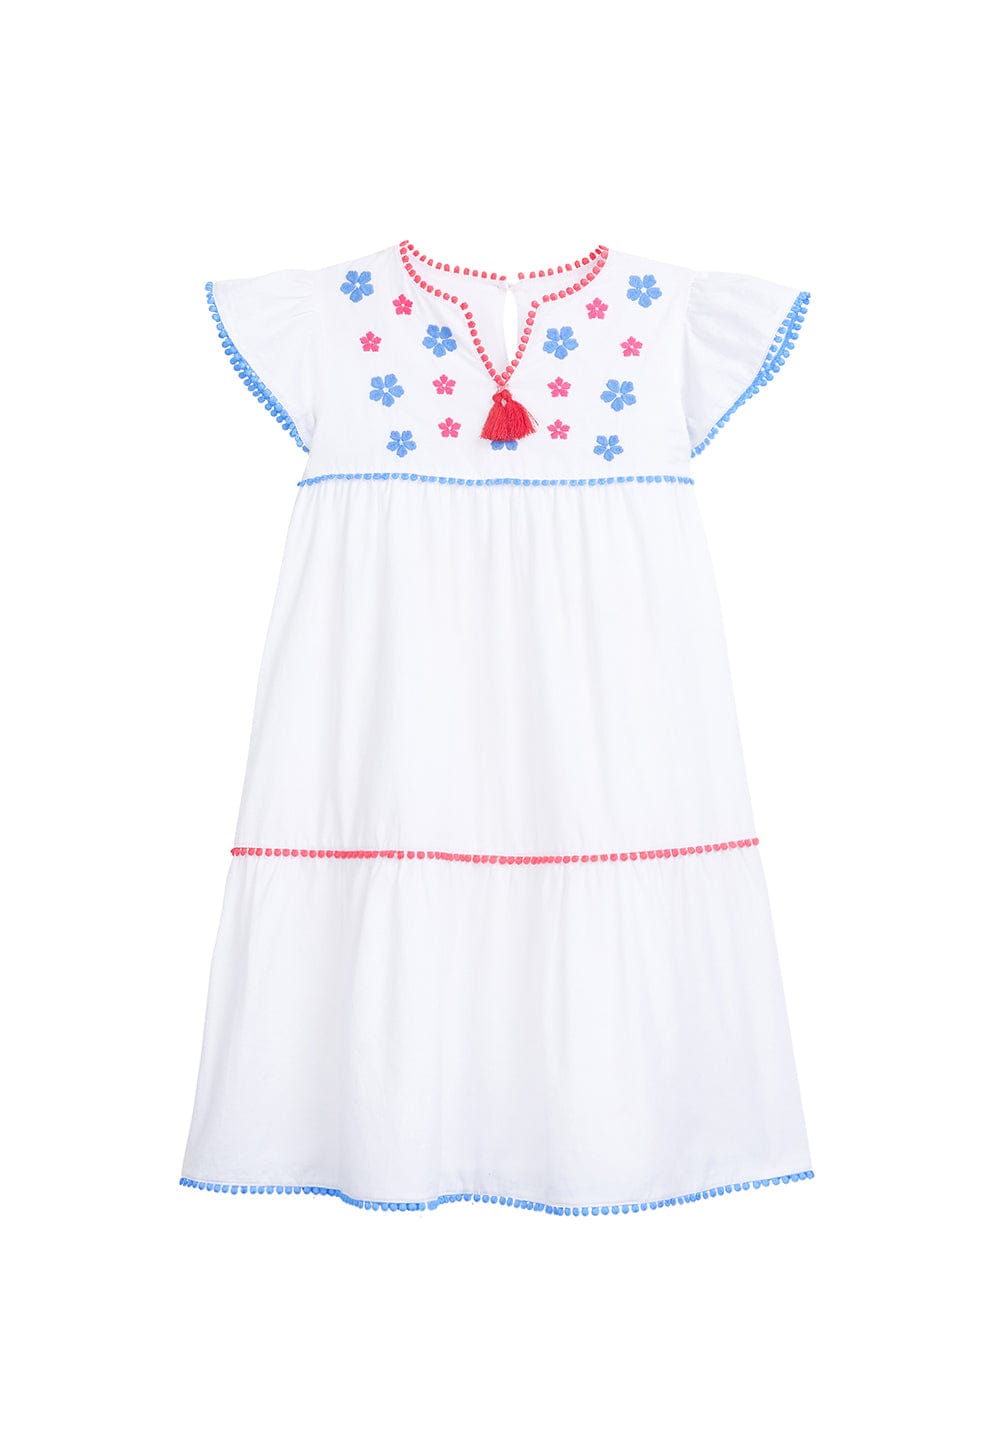 Positano Dress - White with Embroidery